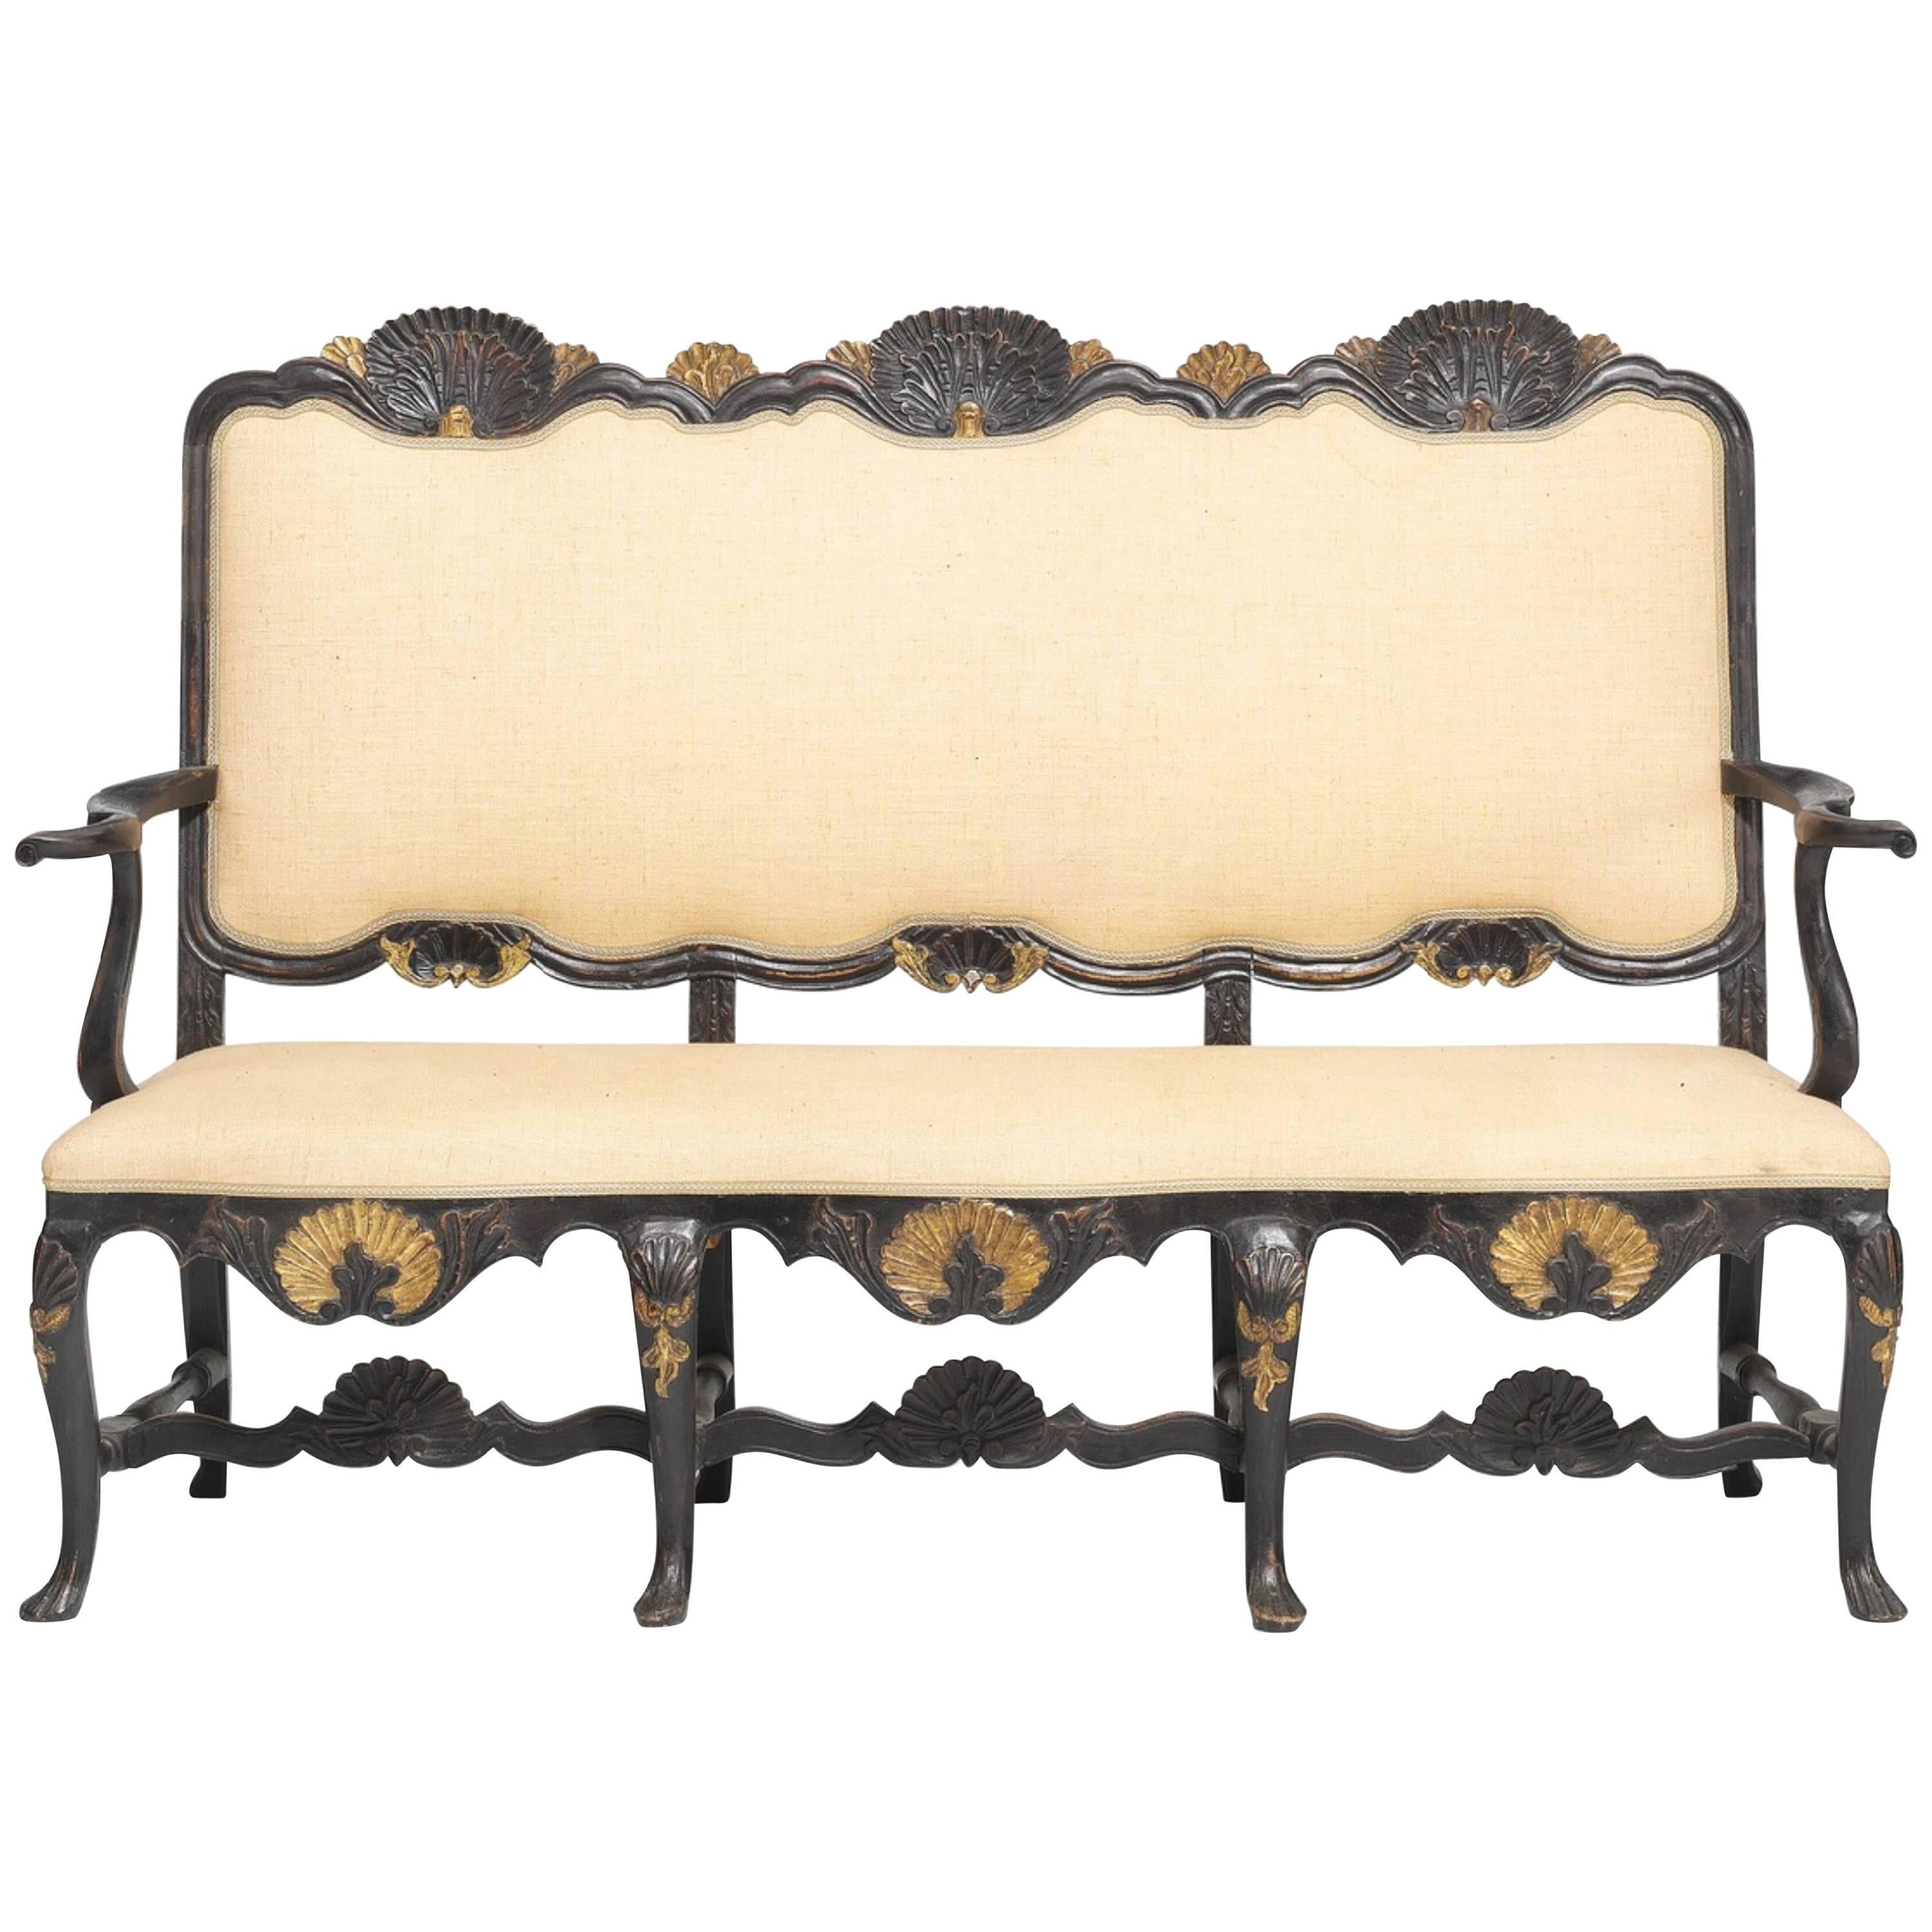 Rococo Settee in Original Painted and Gilt Finish, Norway, circa 1750